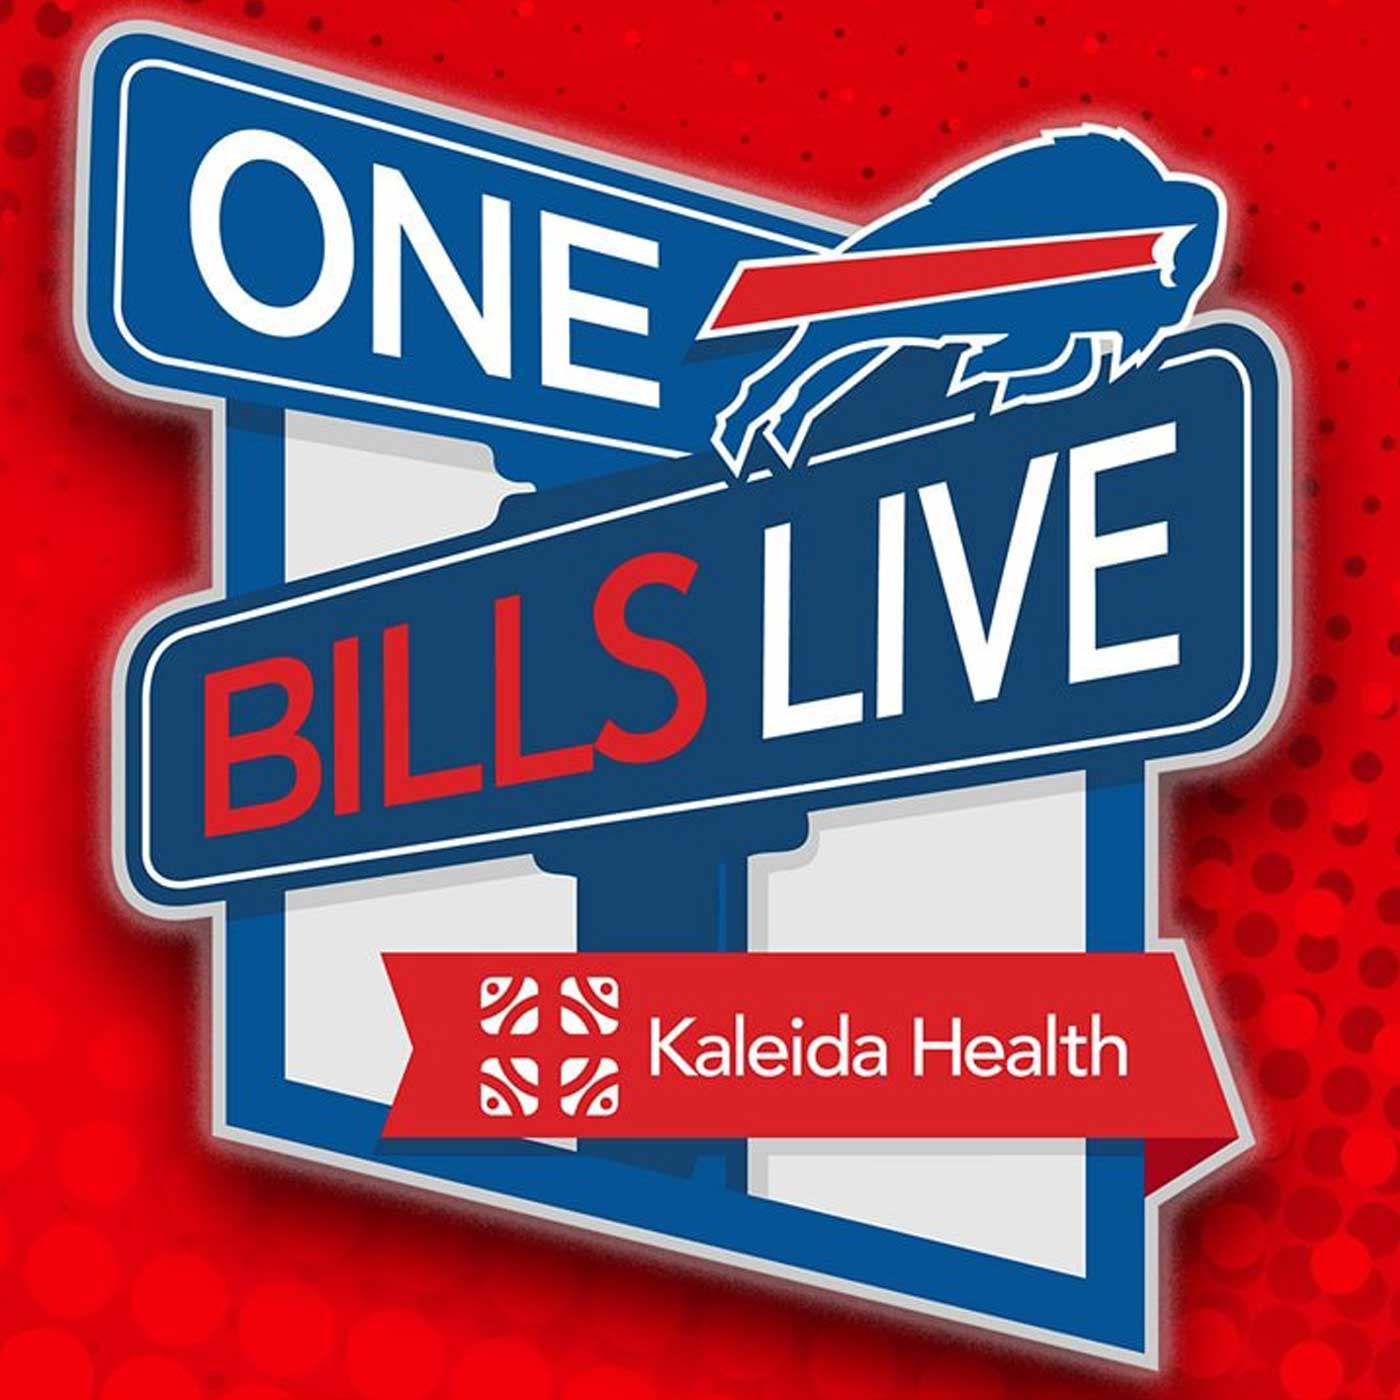 OBL 1/20: Previewing Bills-Chiefs with Thurman Thomas, keys to offensive success